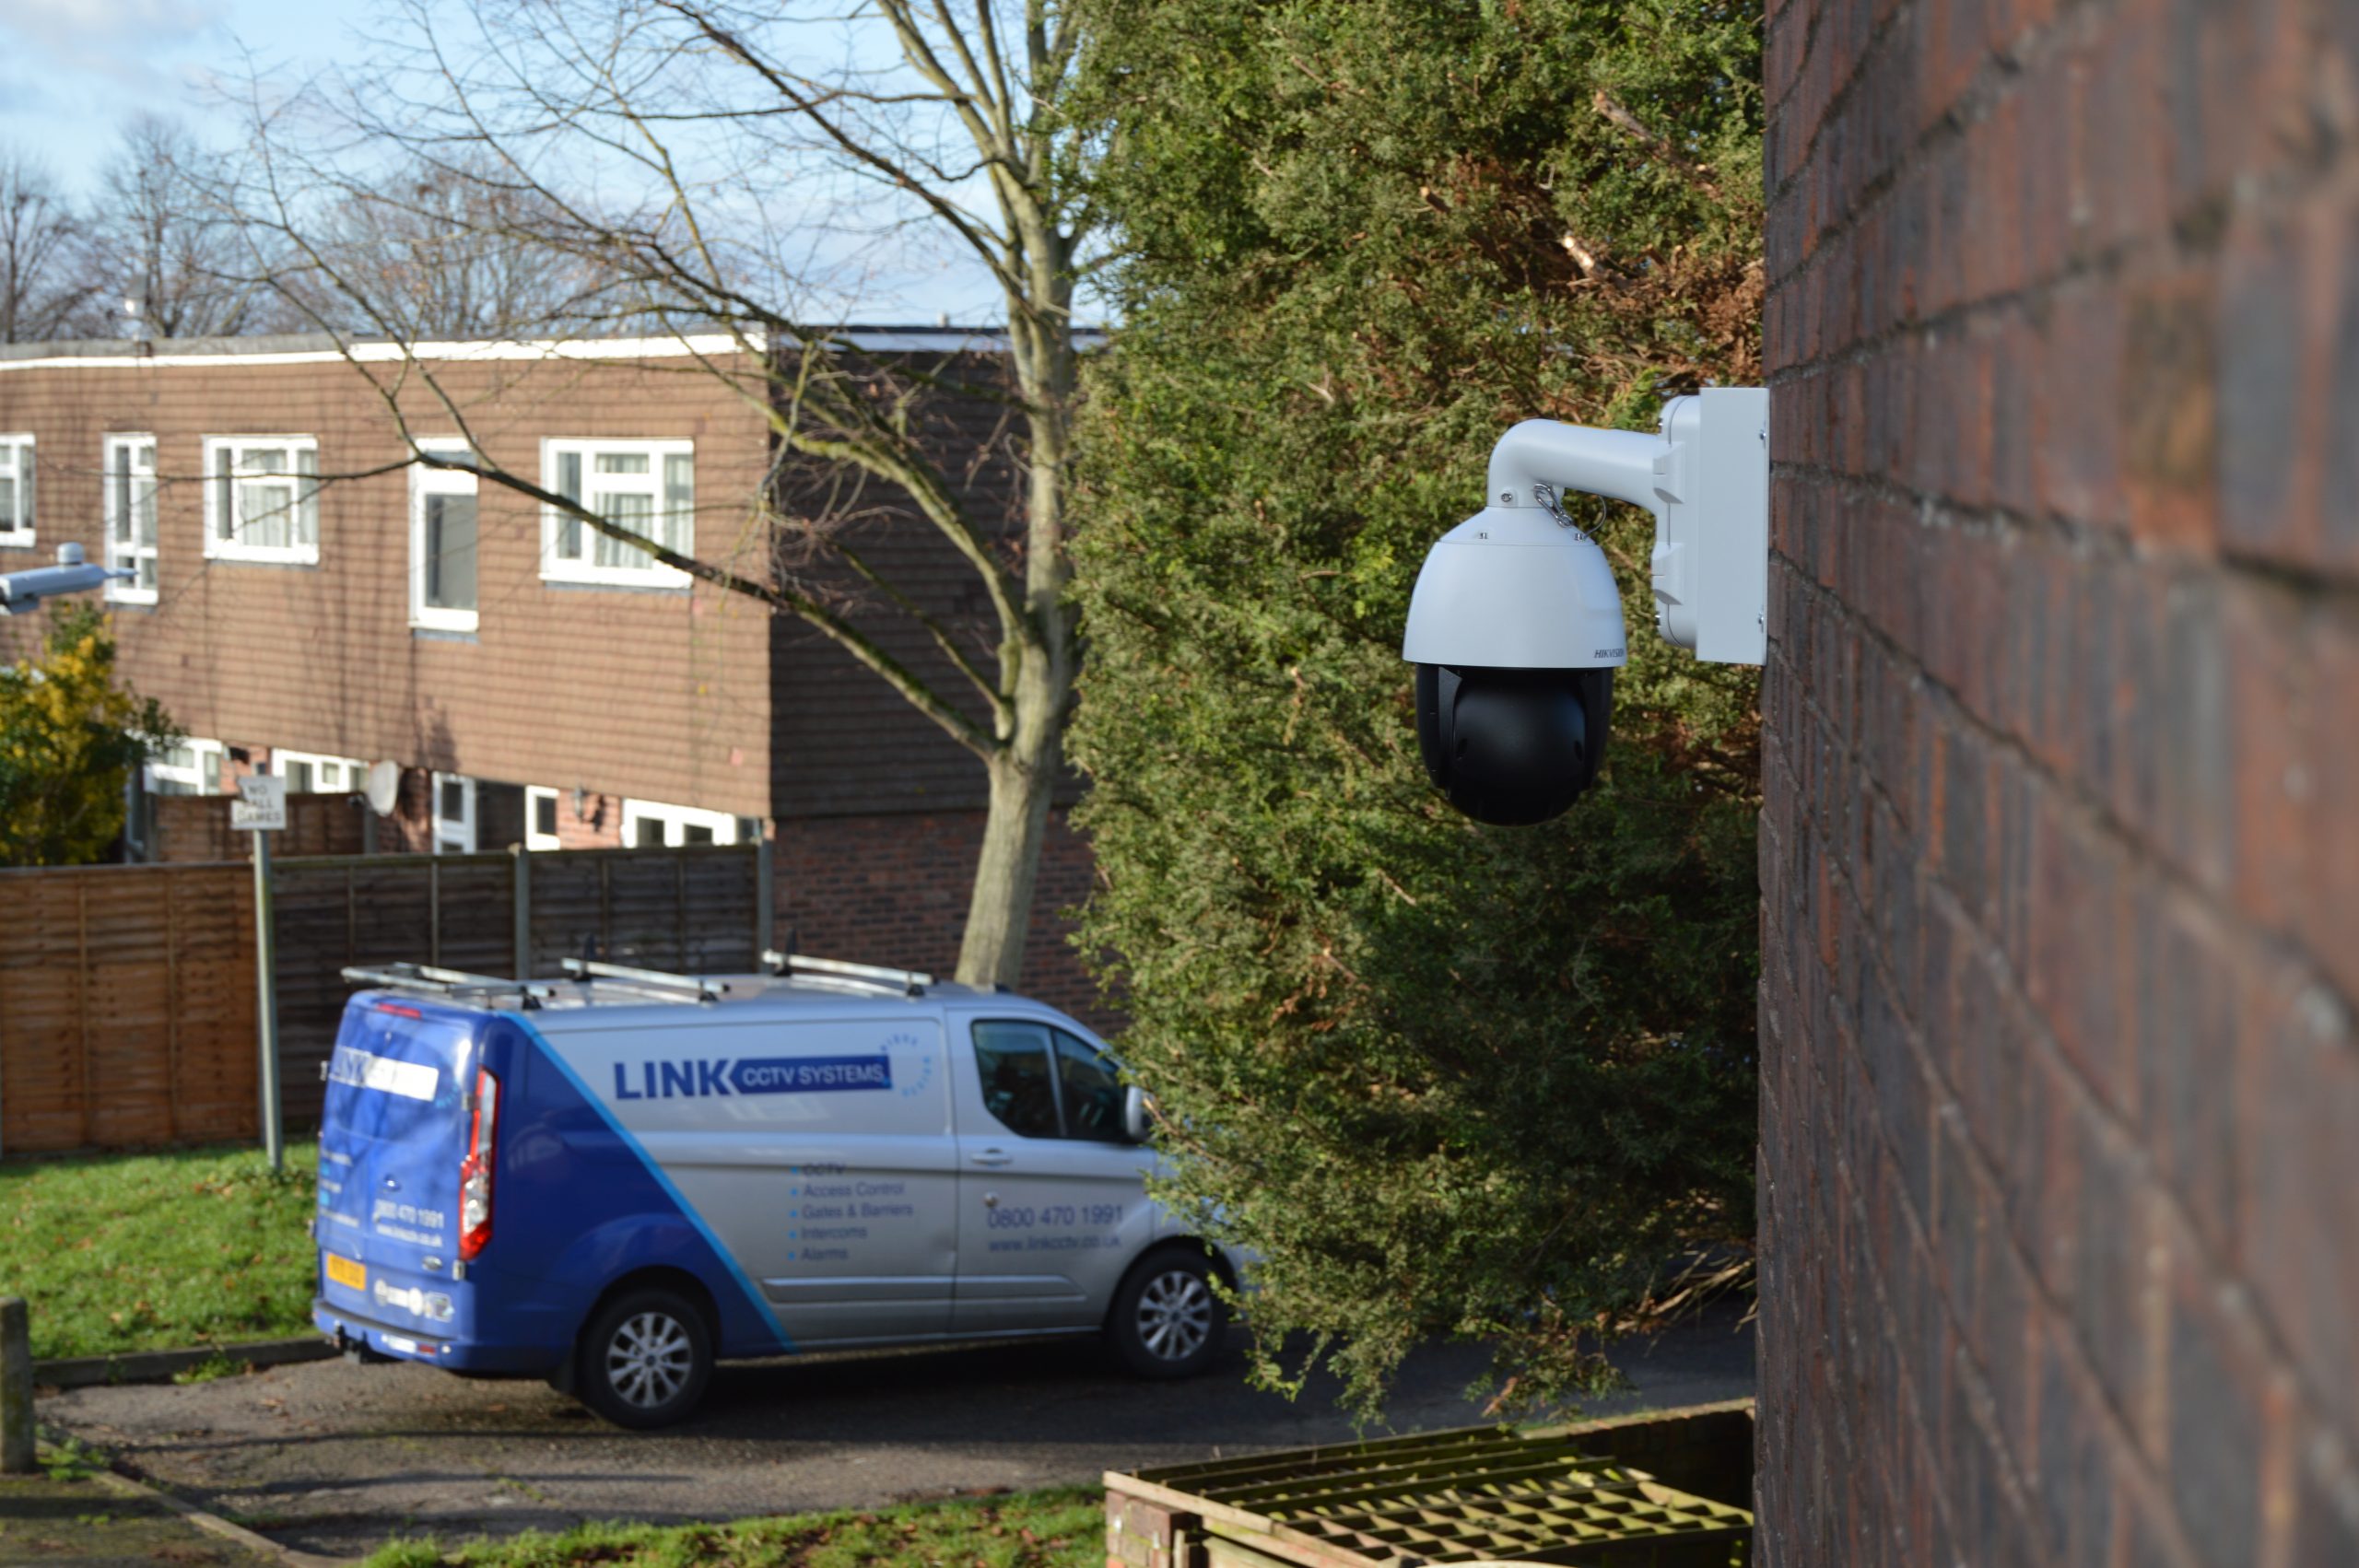 A camera installed on a brick wall by Link CCTV Systems, with a Link CCTV Systems van in the background.